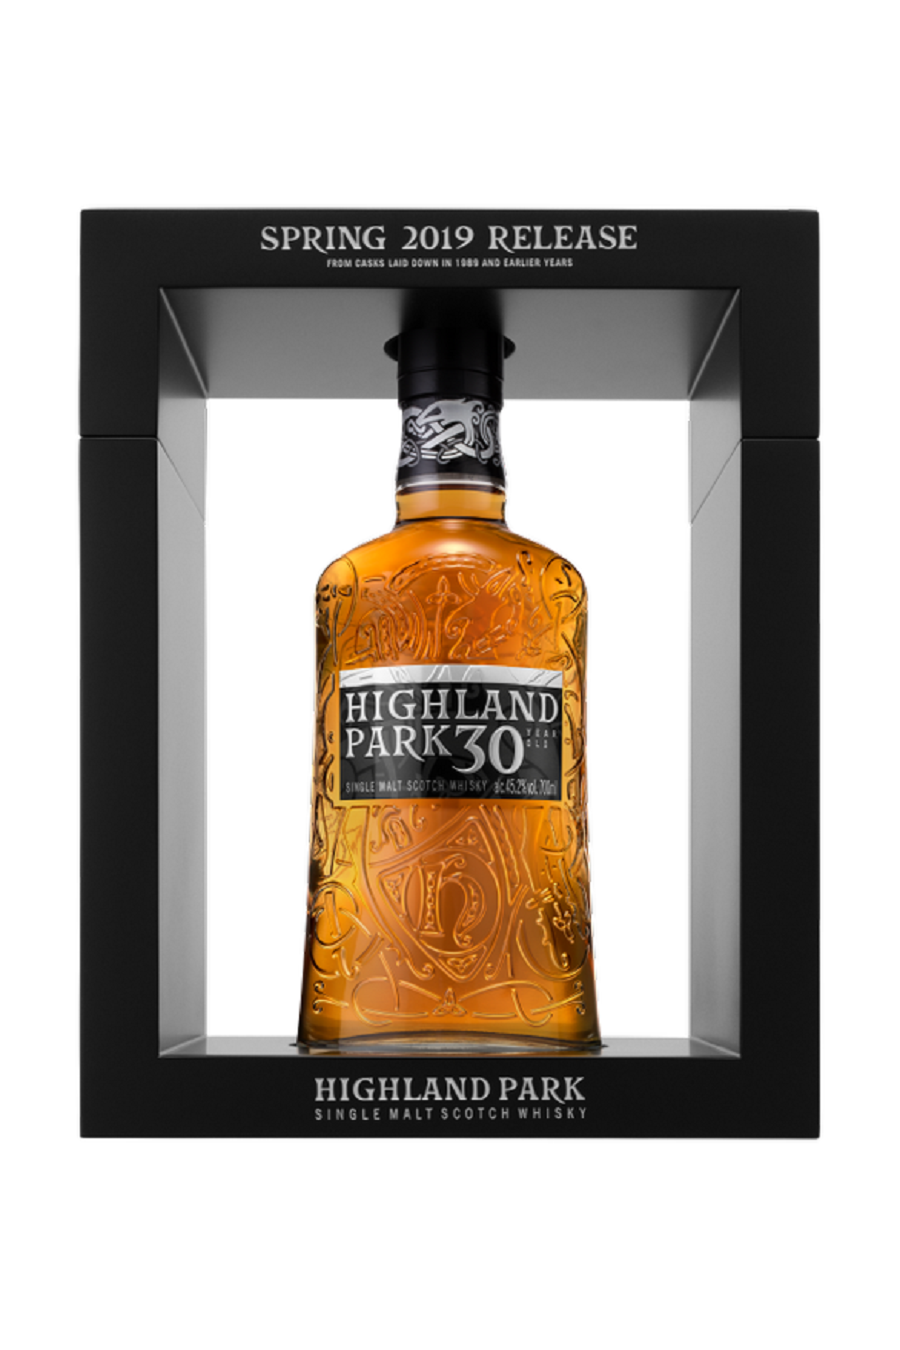 highland park 30 year old spring 2019 release | scotch whisky